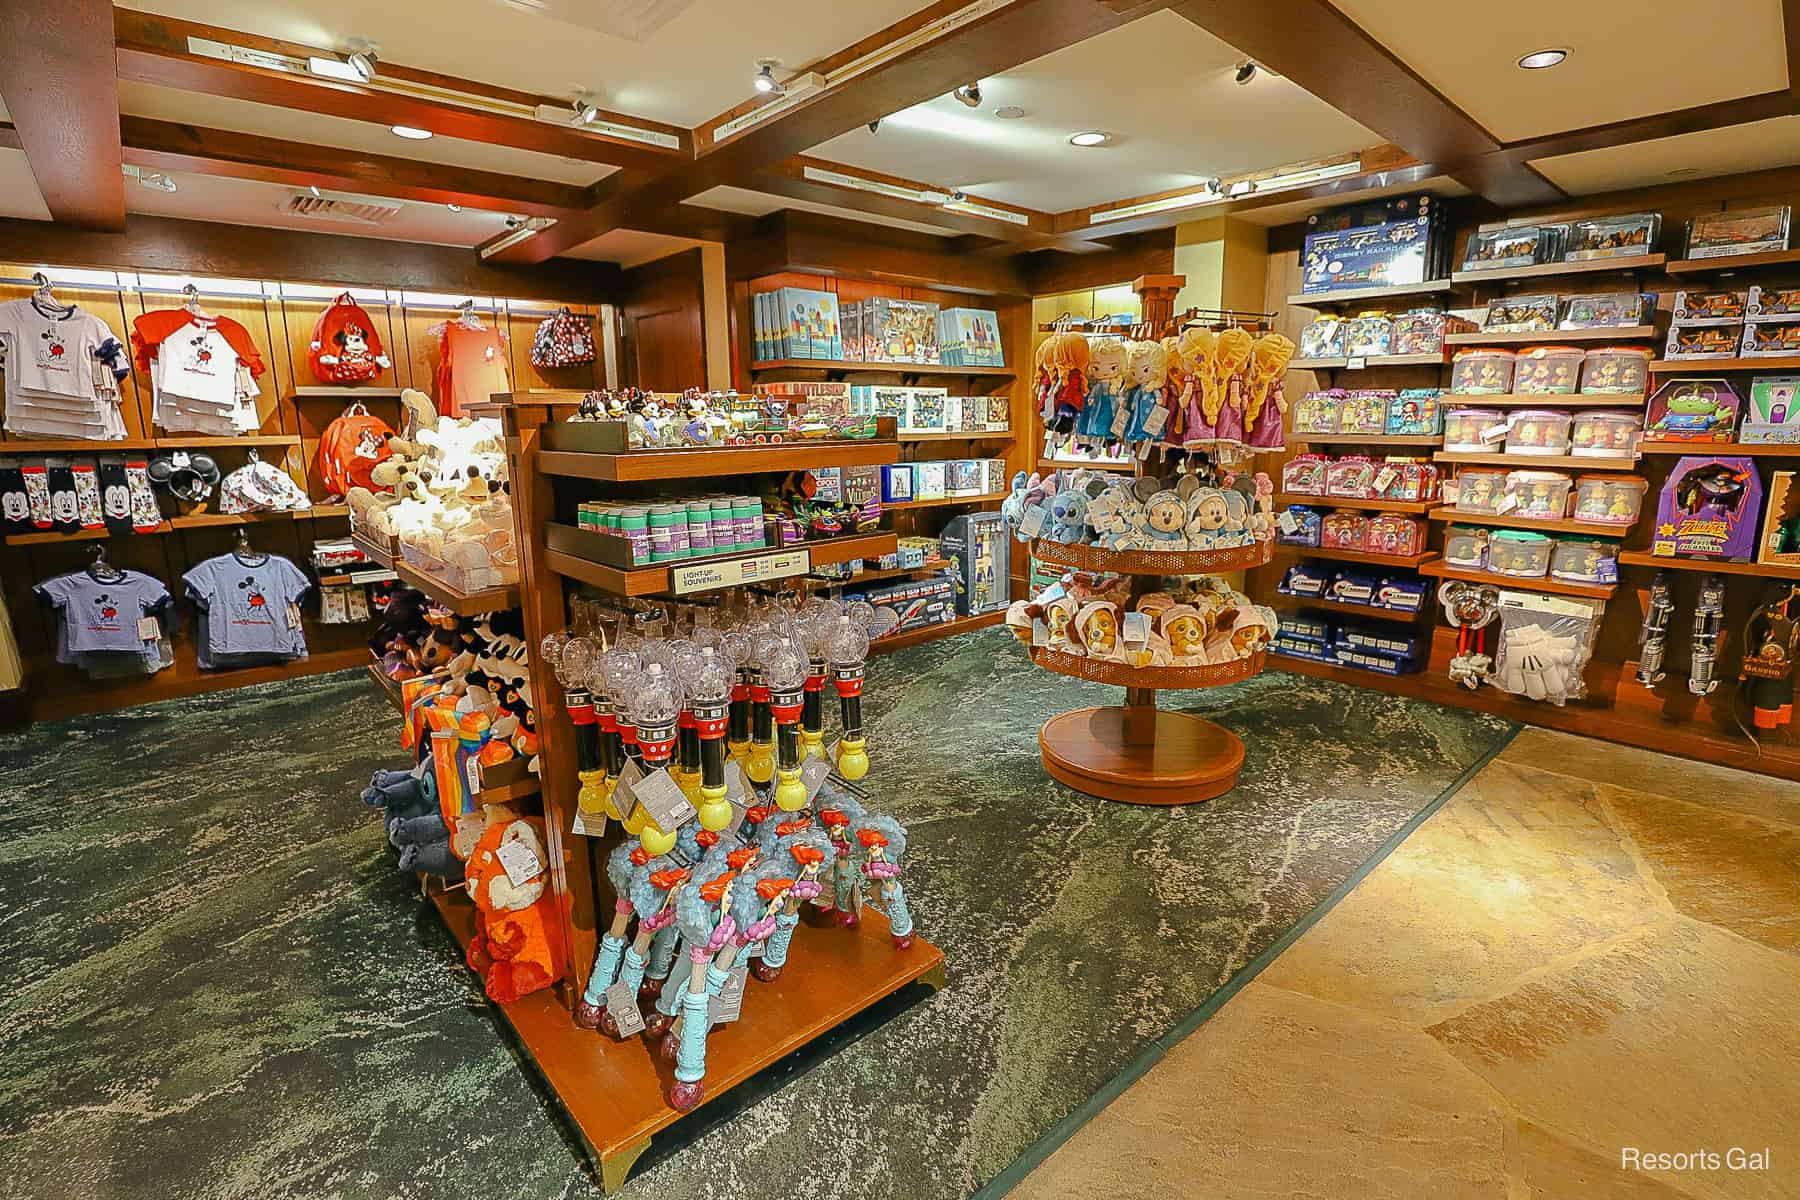 the toy section of the Wilderness Lodge's gift shop 